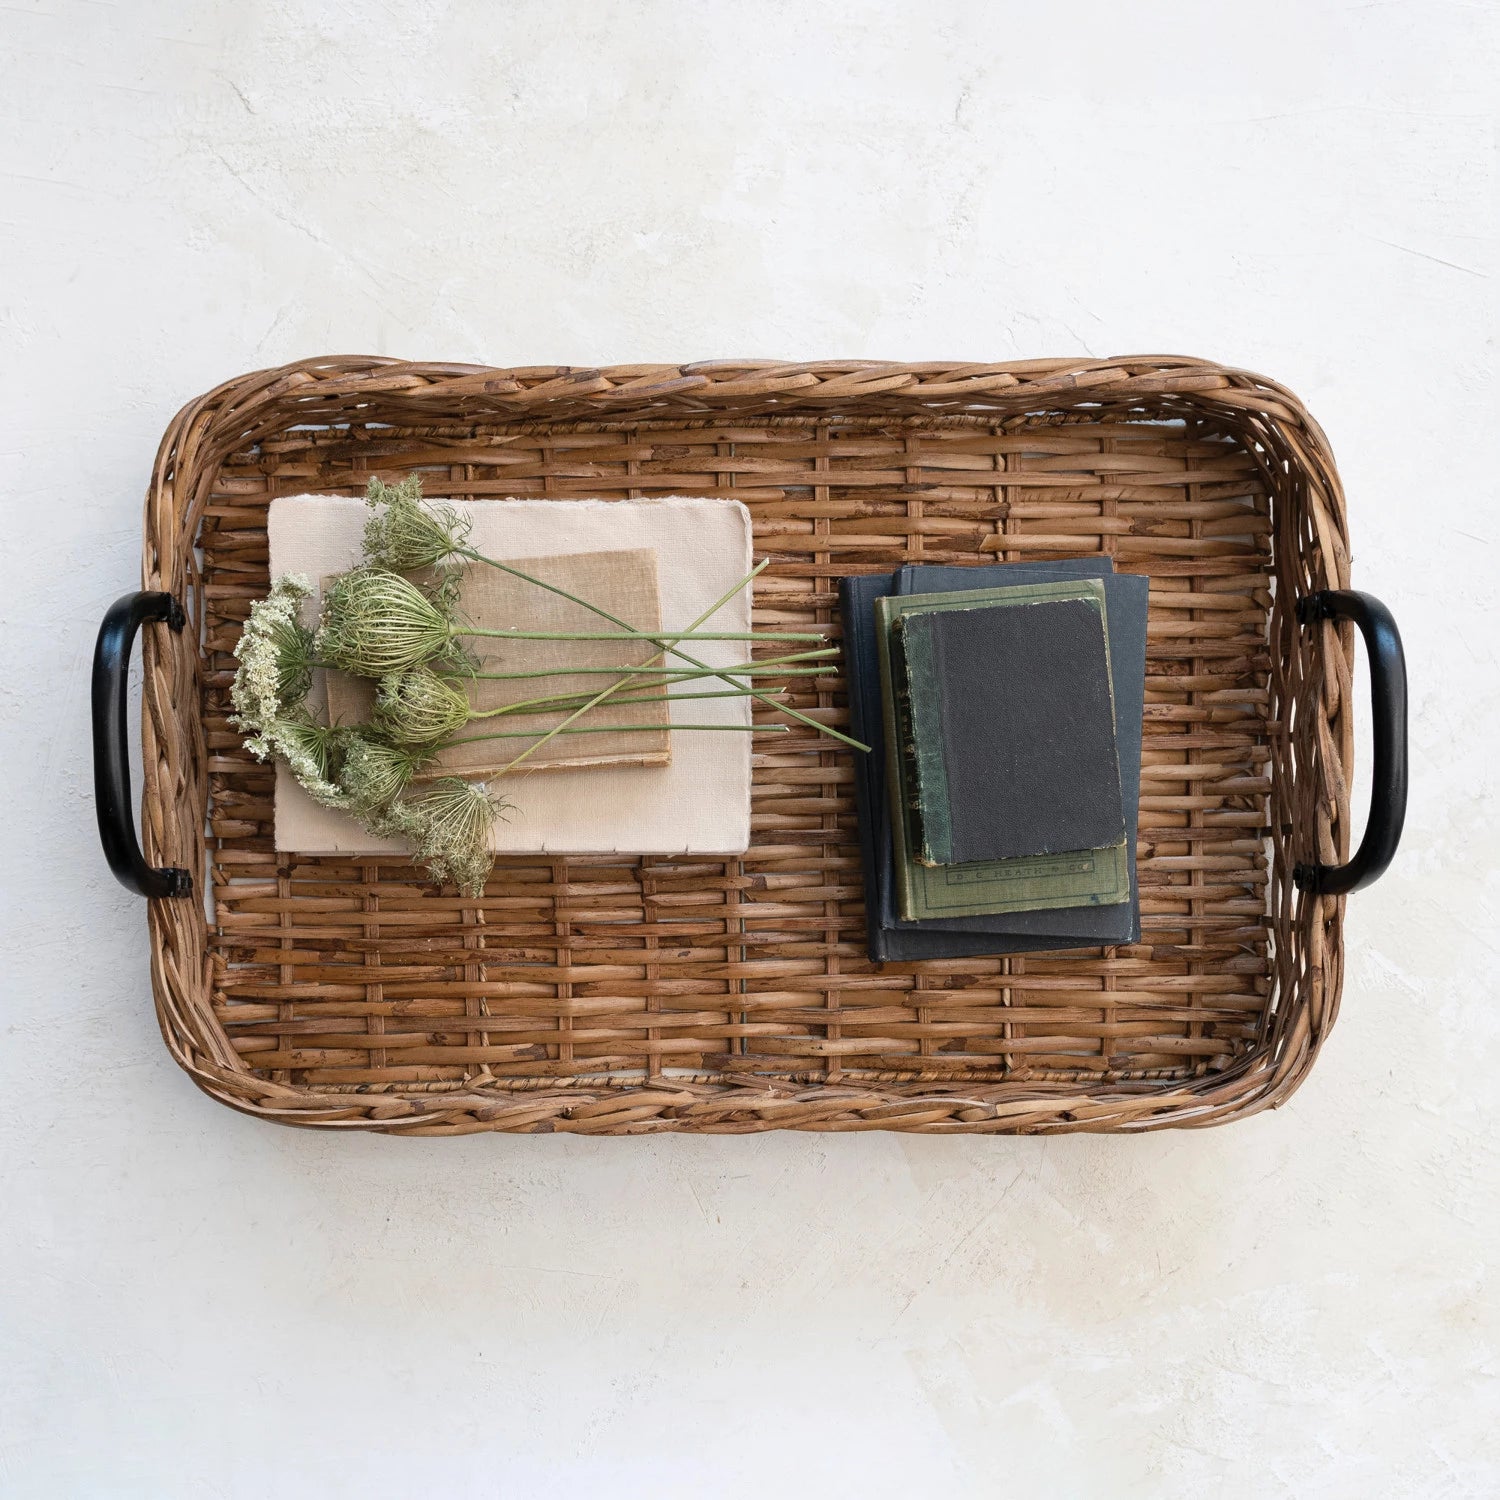 Decorative Hand-Woven Rattan Tray with Metal Handles